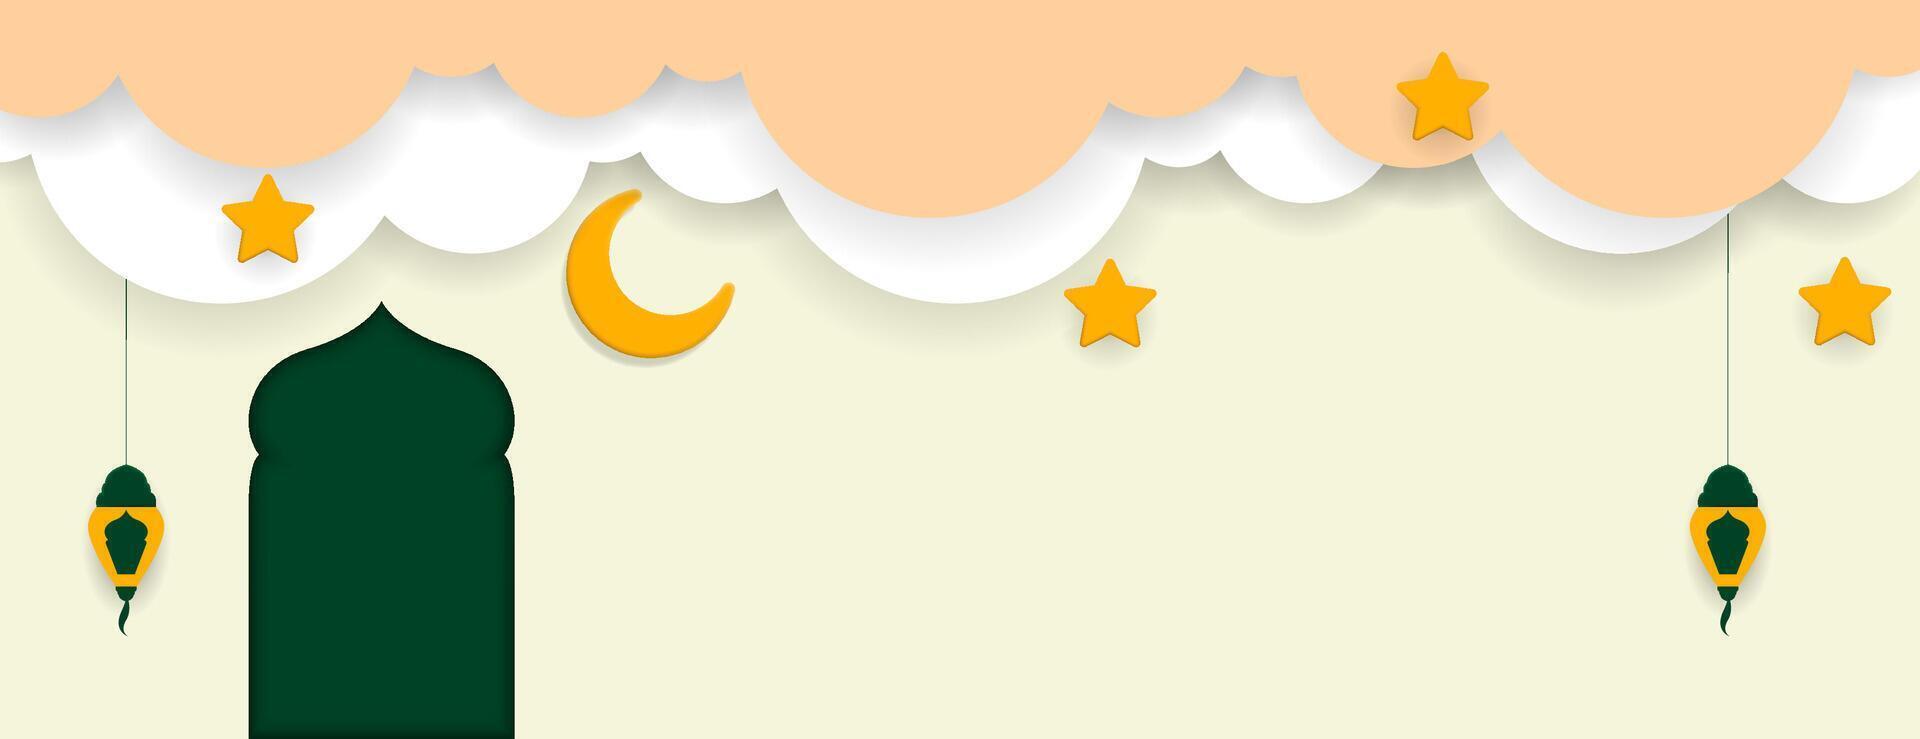 islamic background with crescent, stars, lantern and cloud. vector illustration